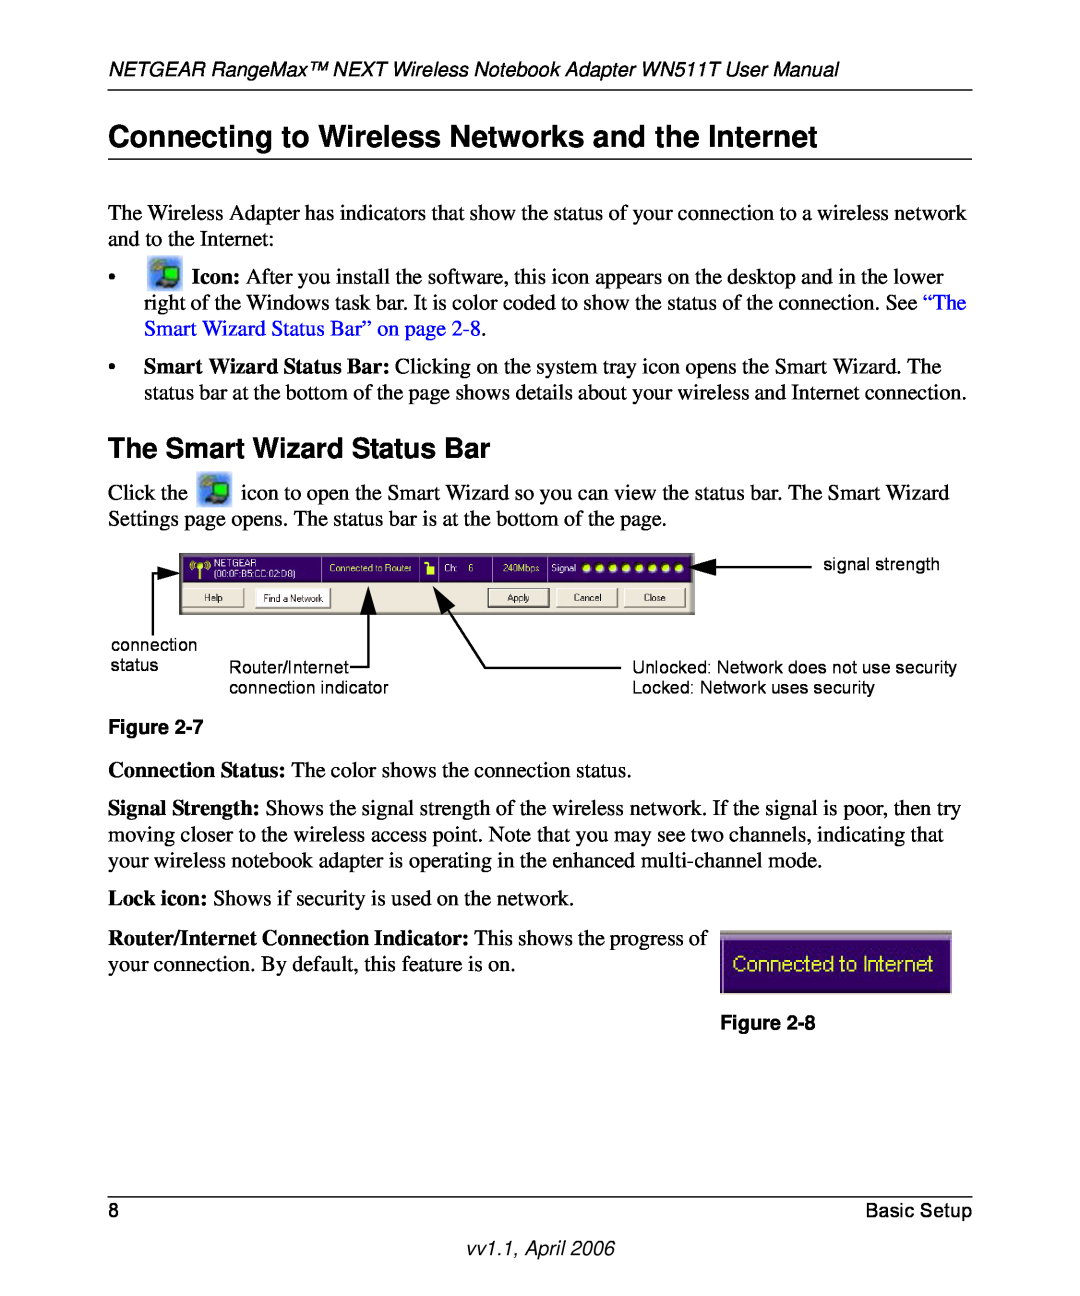 NETGEAR WN511T user manual Connecting to Wireless Networks and the Internet, The Smart Wizard Status Bar 